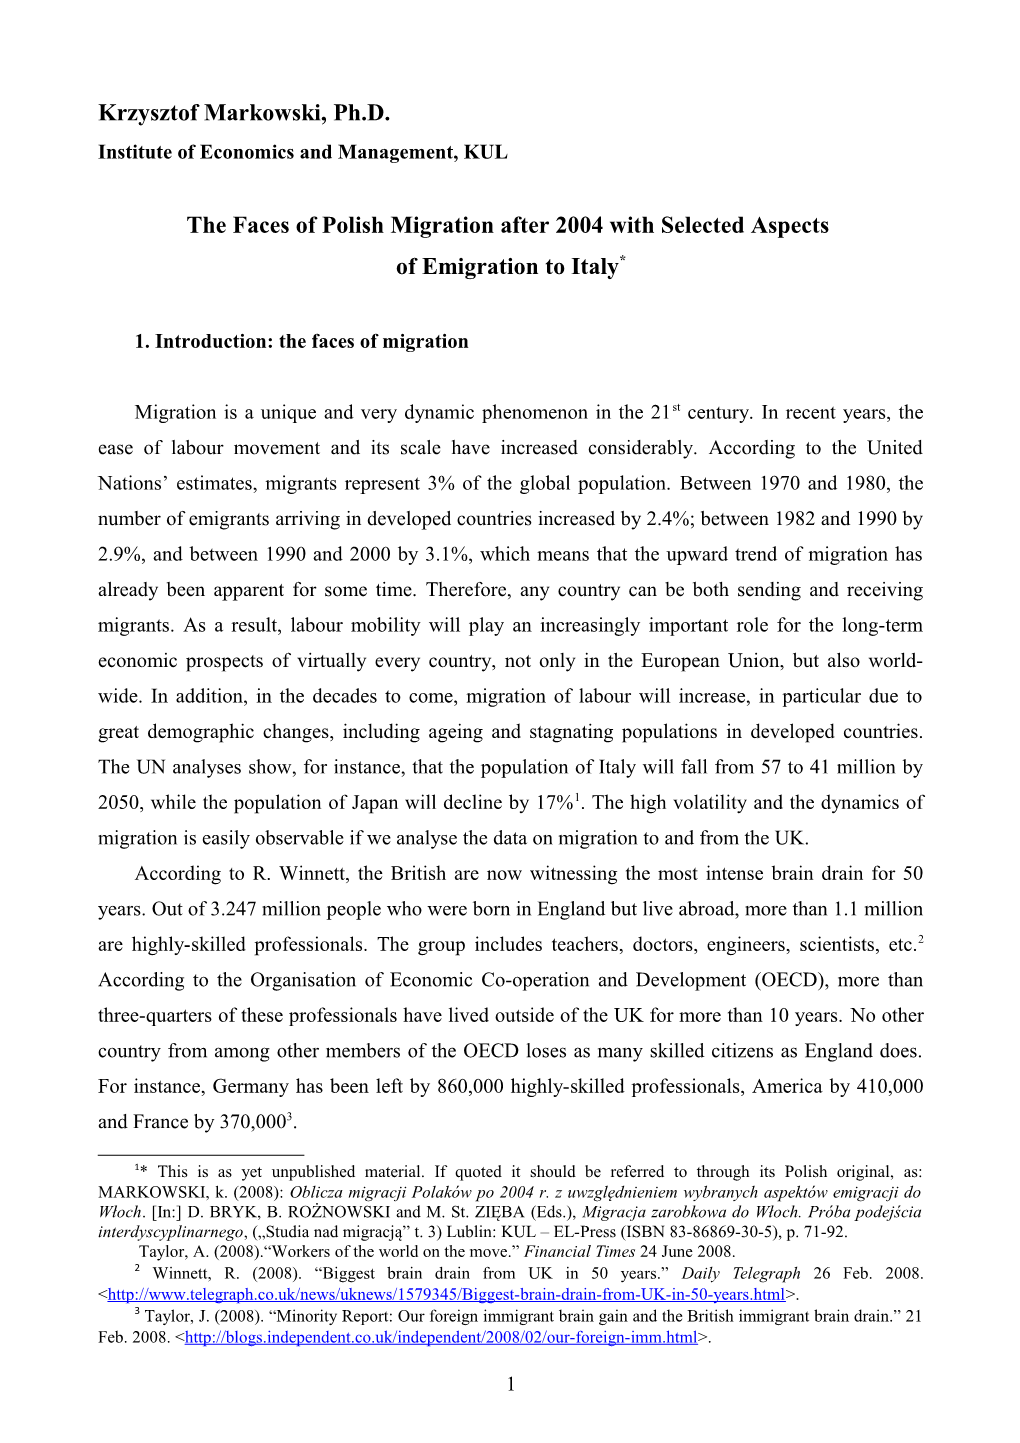 Faces of Polish Migration After 2004 with Selected Aspects of Emigration to Italy